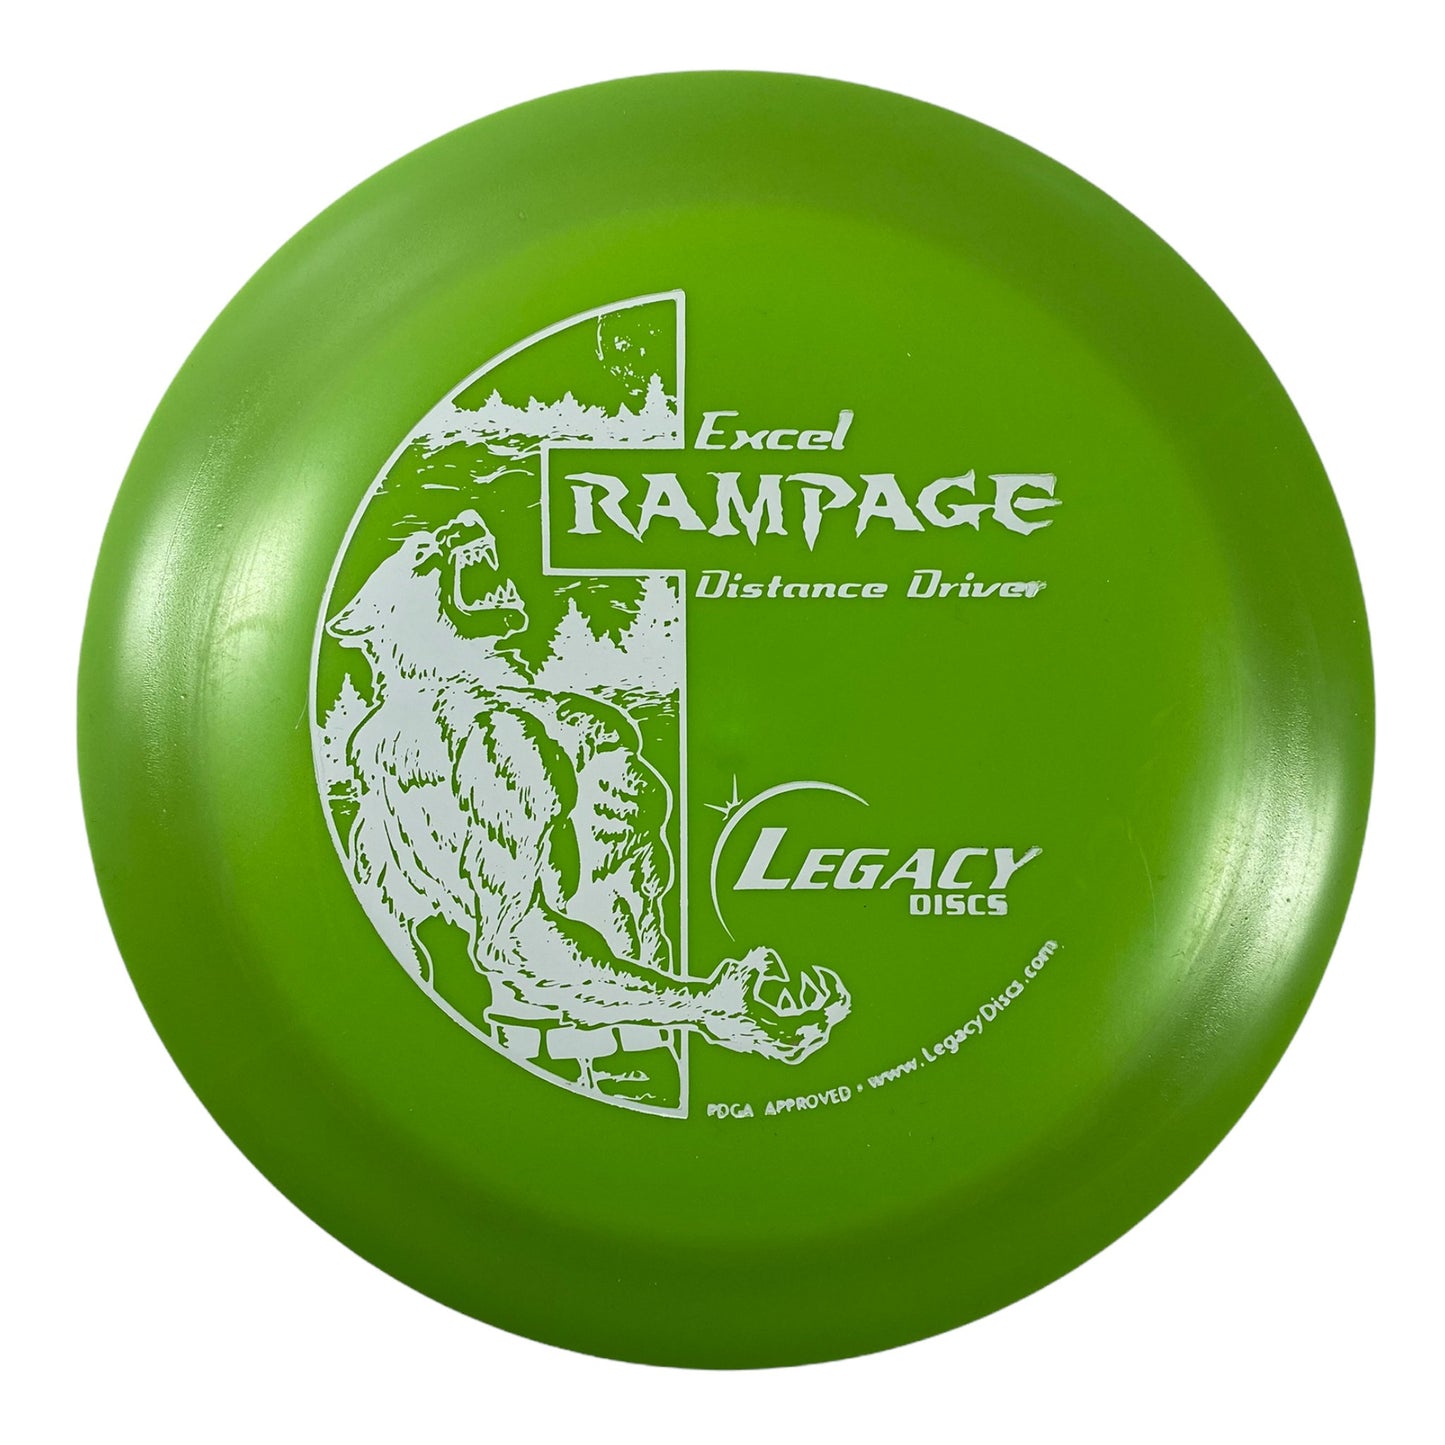 Legacy Discs Rampage | Excel | Green/White 171g Disc Golf